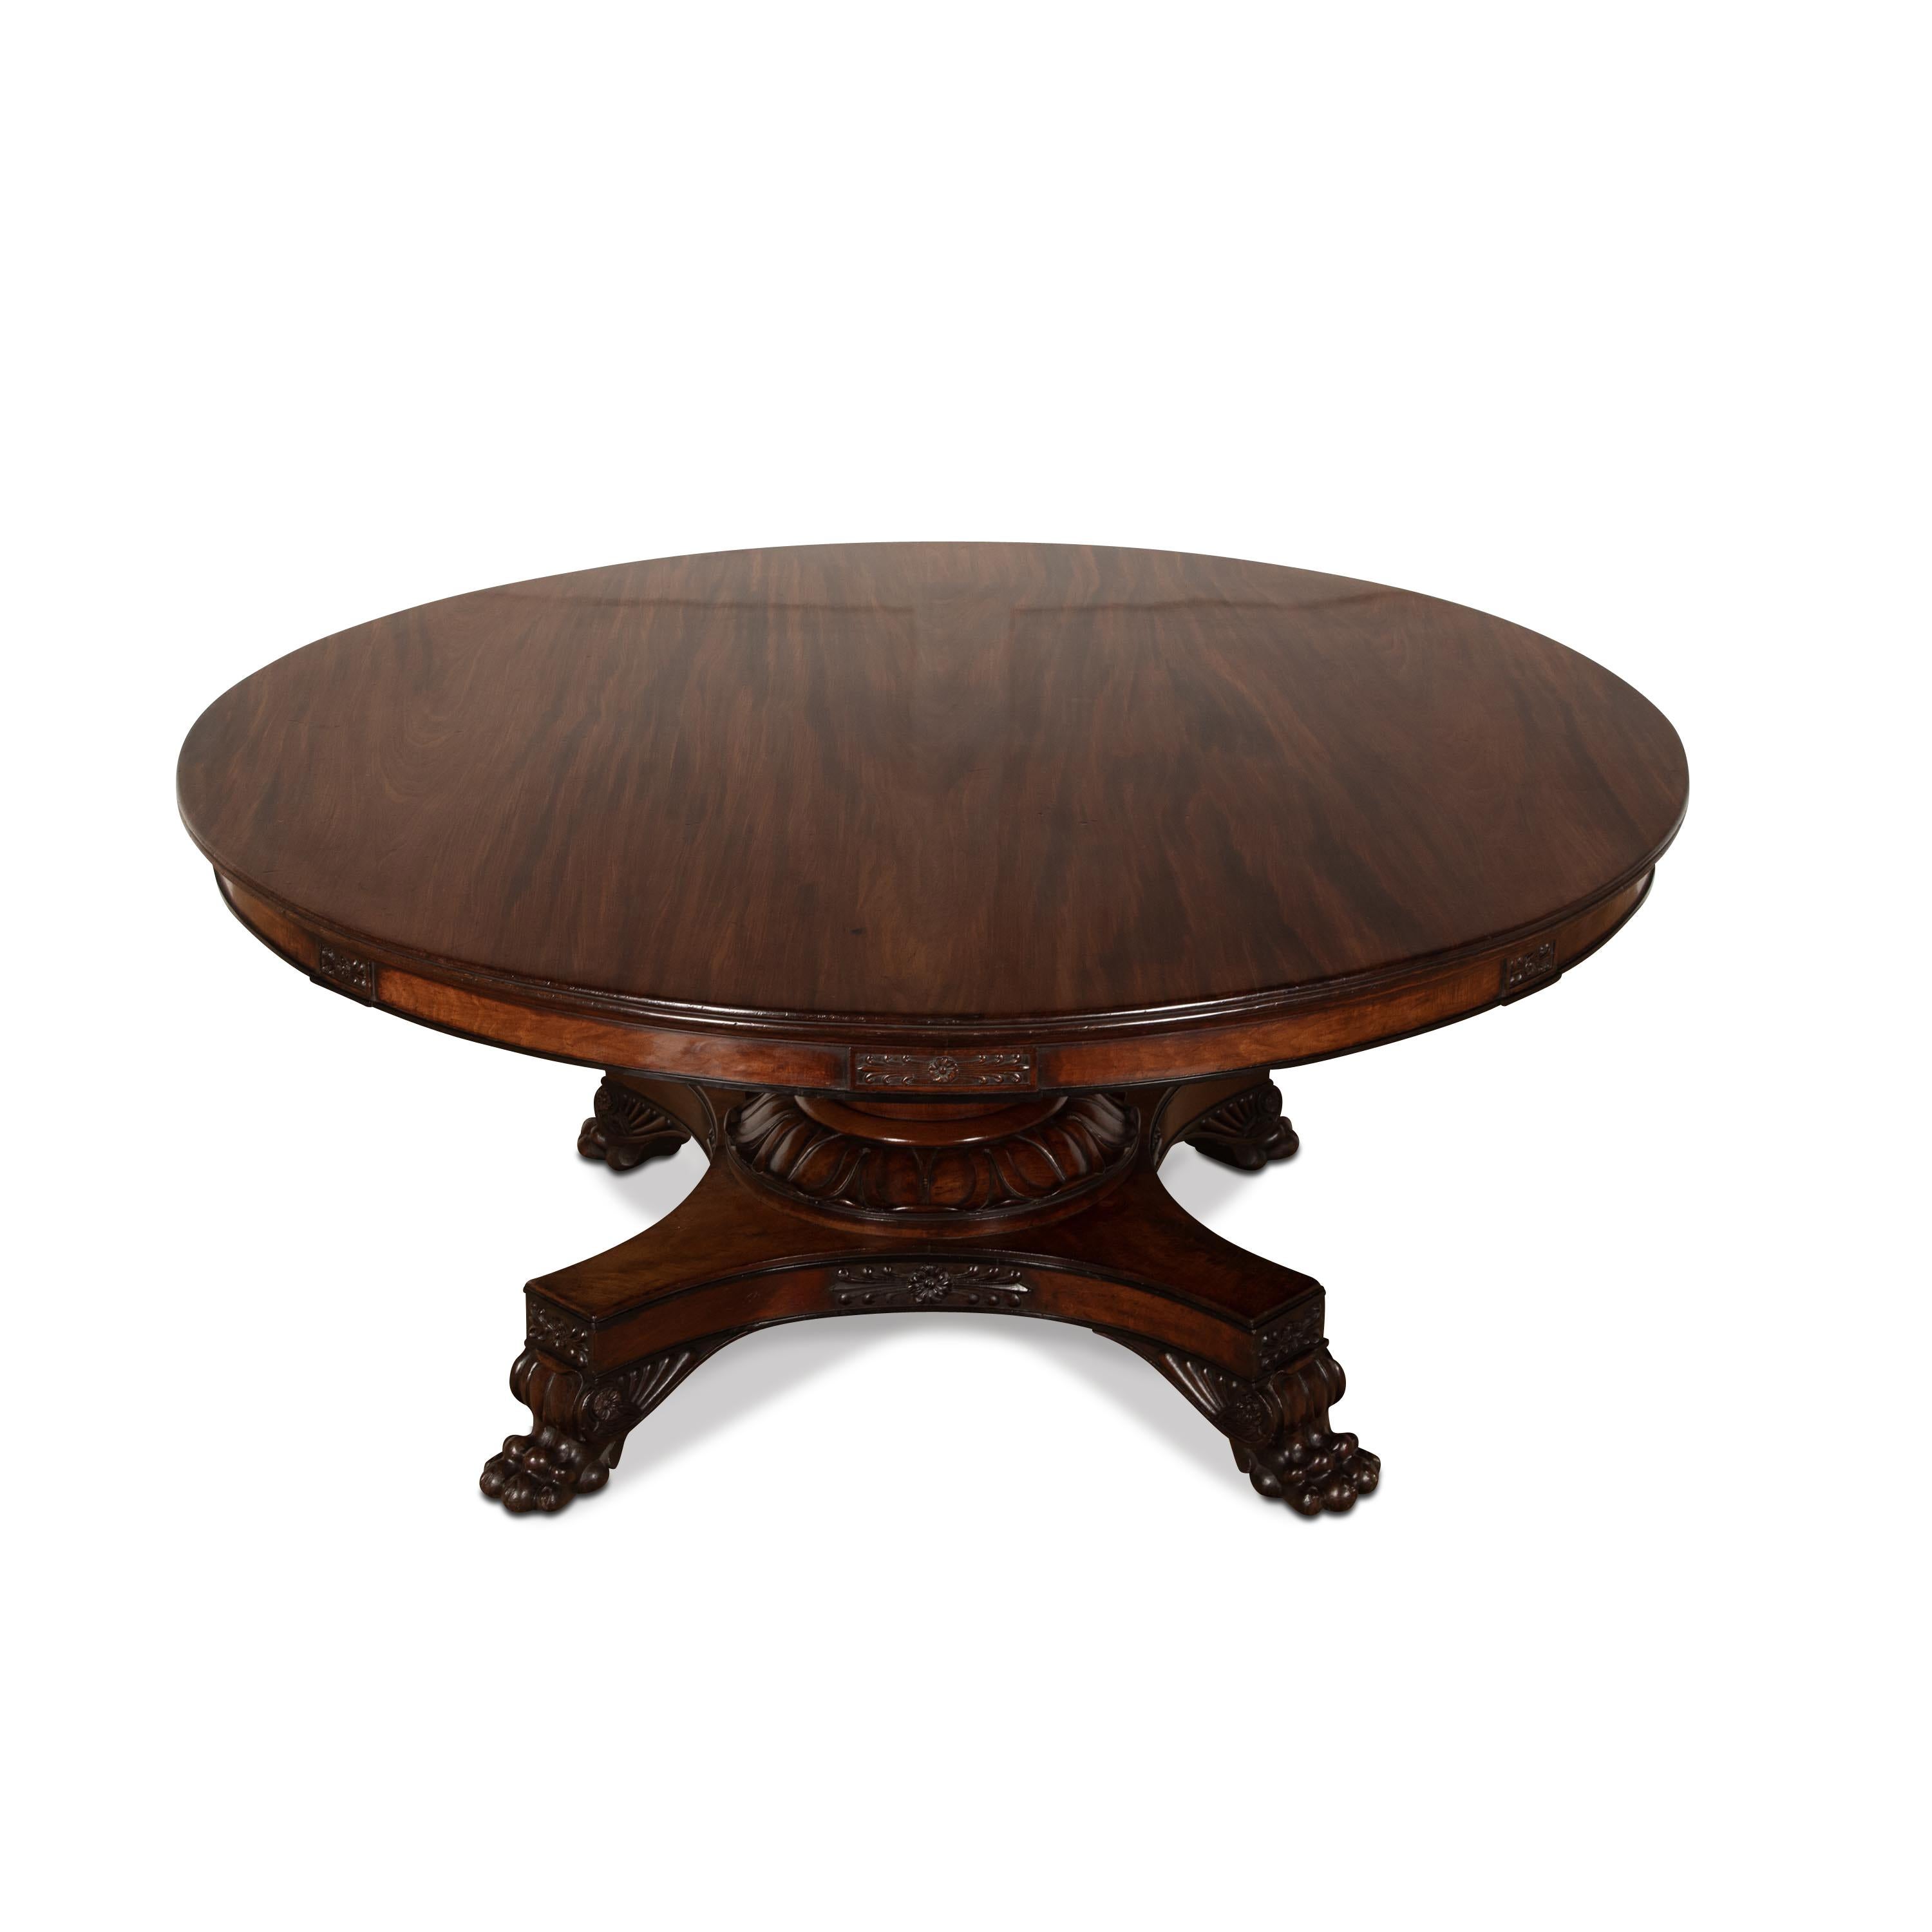 A highly important Regency mahogany and ebony centre table of superior quality, spectacular scale and featuring Thomas Hope`s Neo-Classical influences. The circular top constructed of the best grade solid figured mahogany with reeded edge, above a